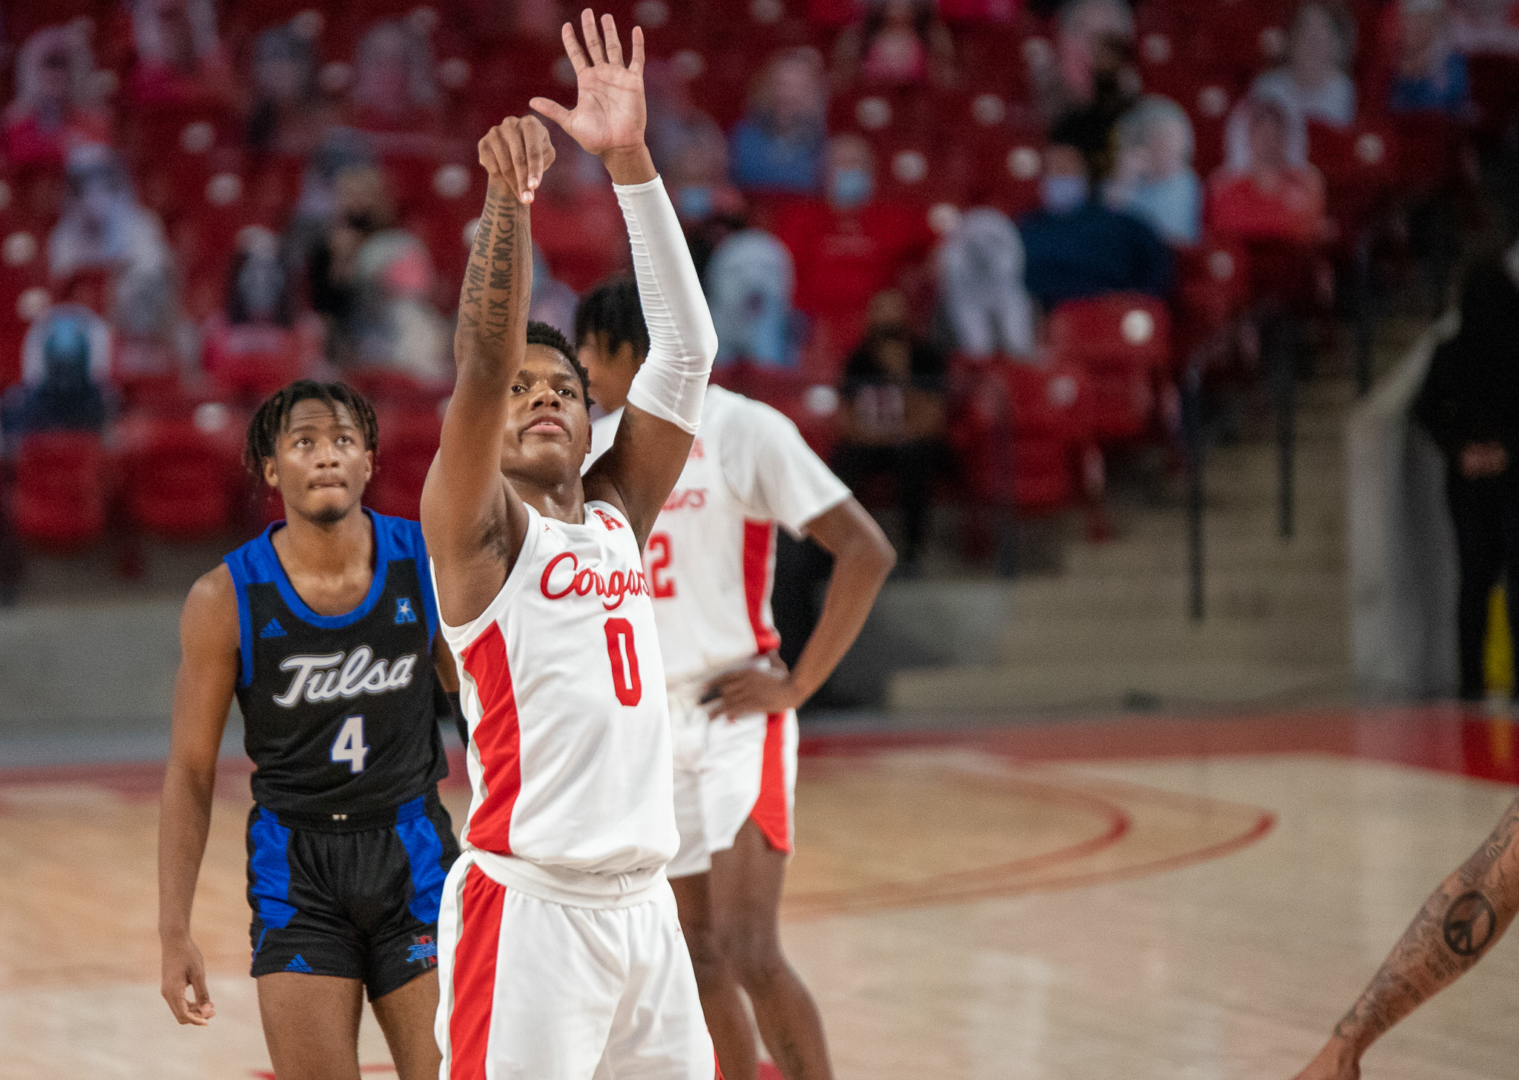 UH guard Marcus Sasser, who hit a career-high eight 3-pointers against Tulane on Jan. 9, holds his form after a free throw against Tulsa on Jan. 20 at Fertitta Center. | Andy Yanez/The Cougar